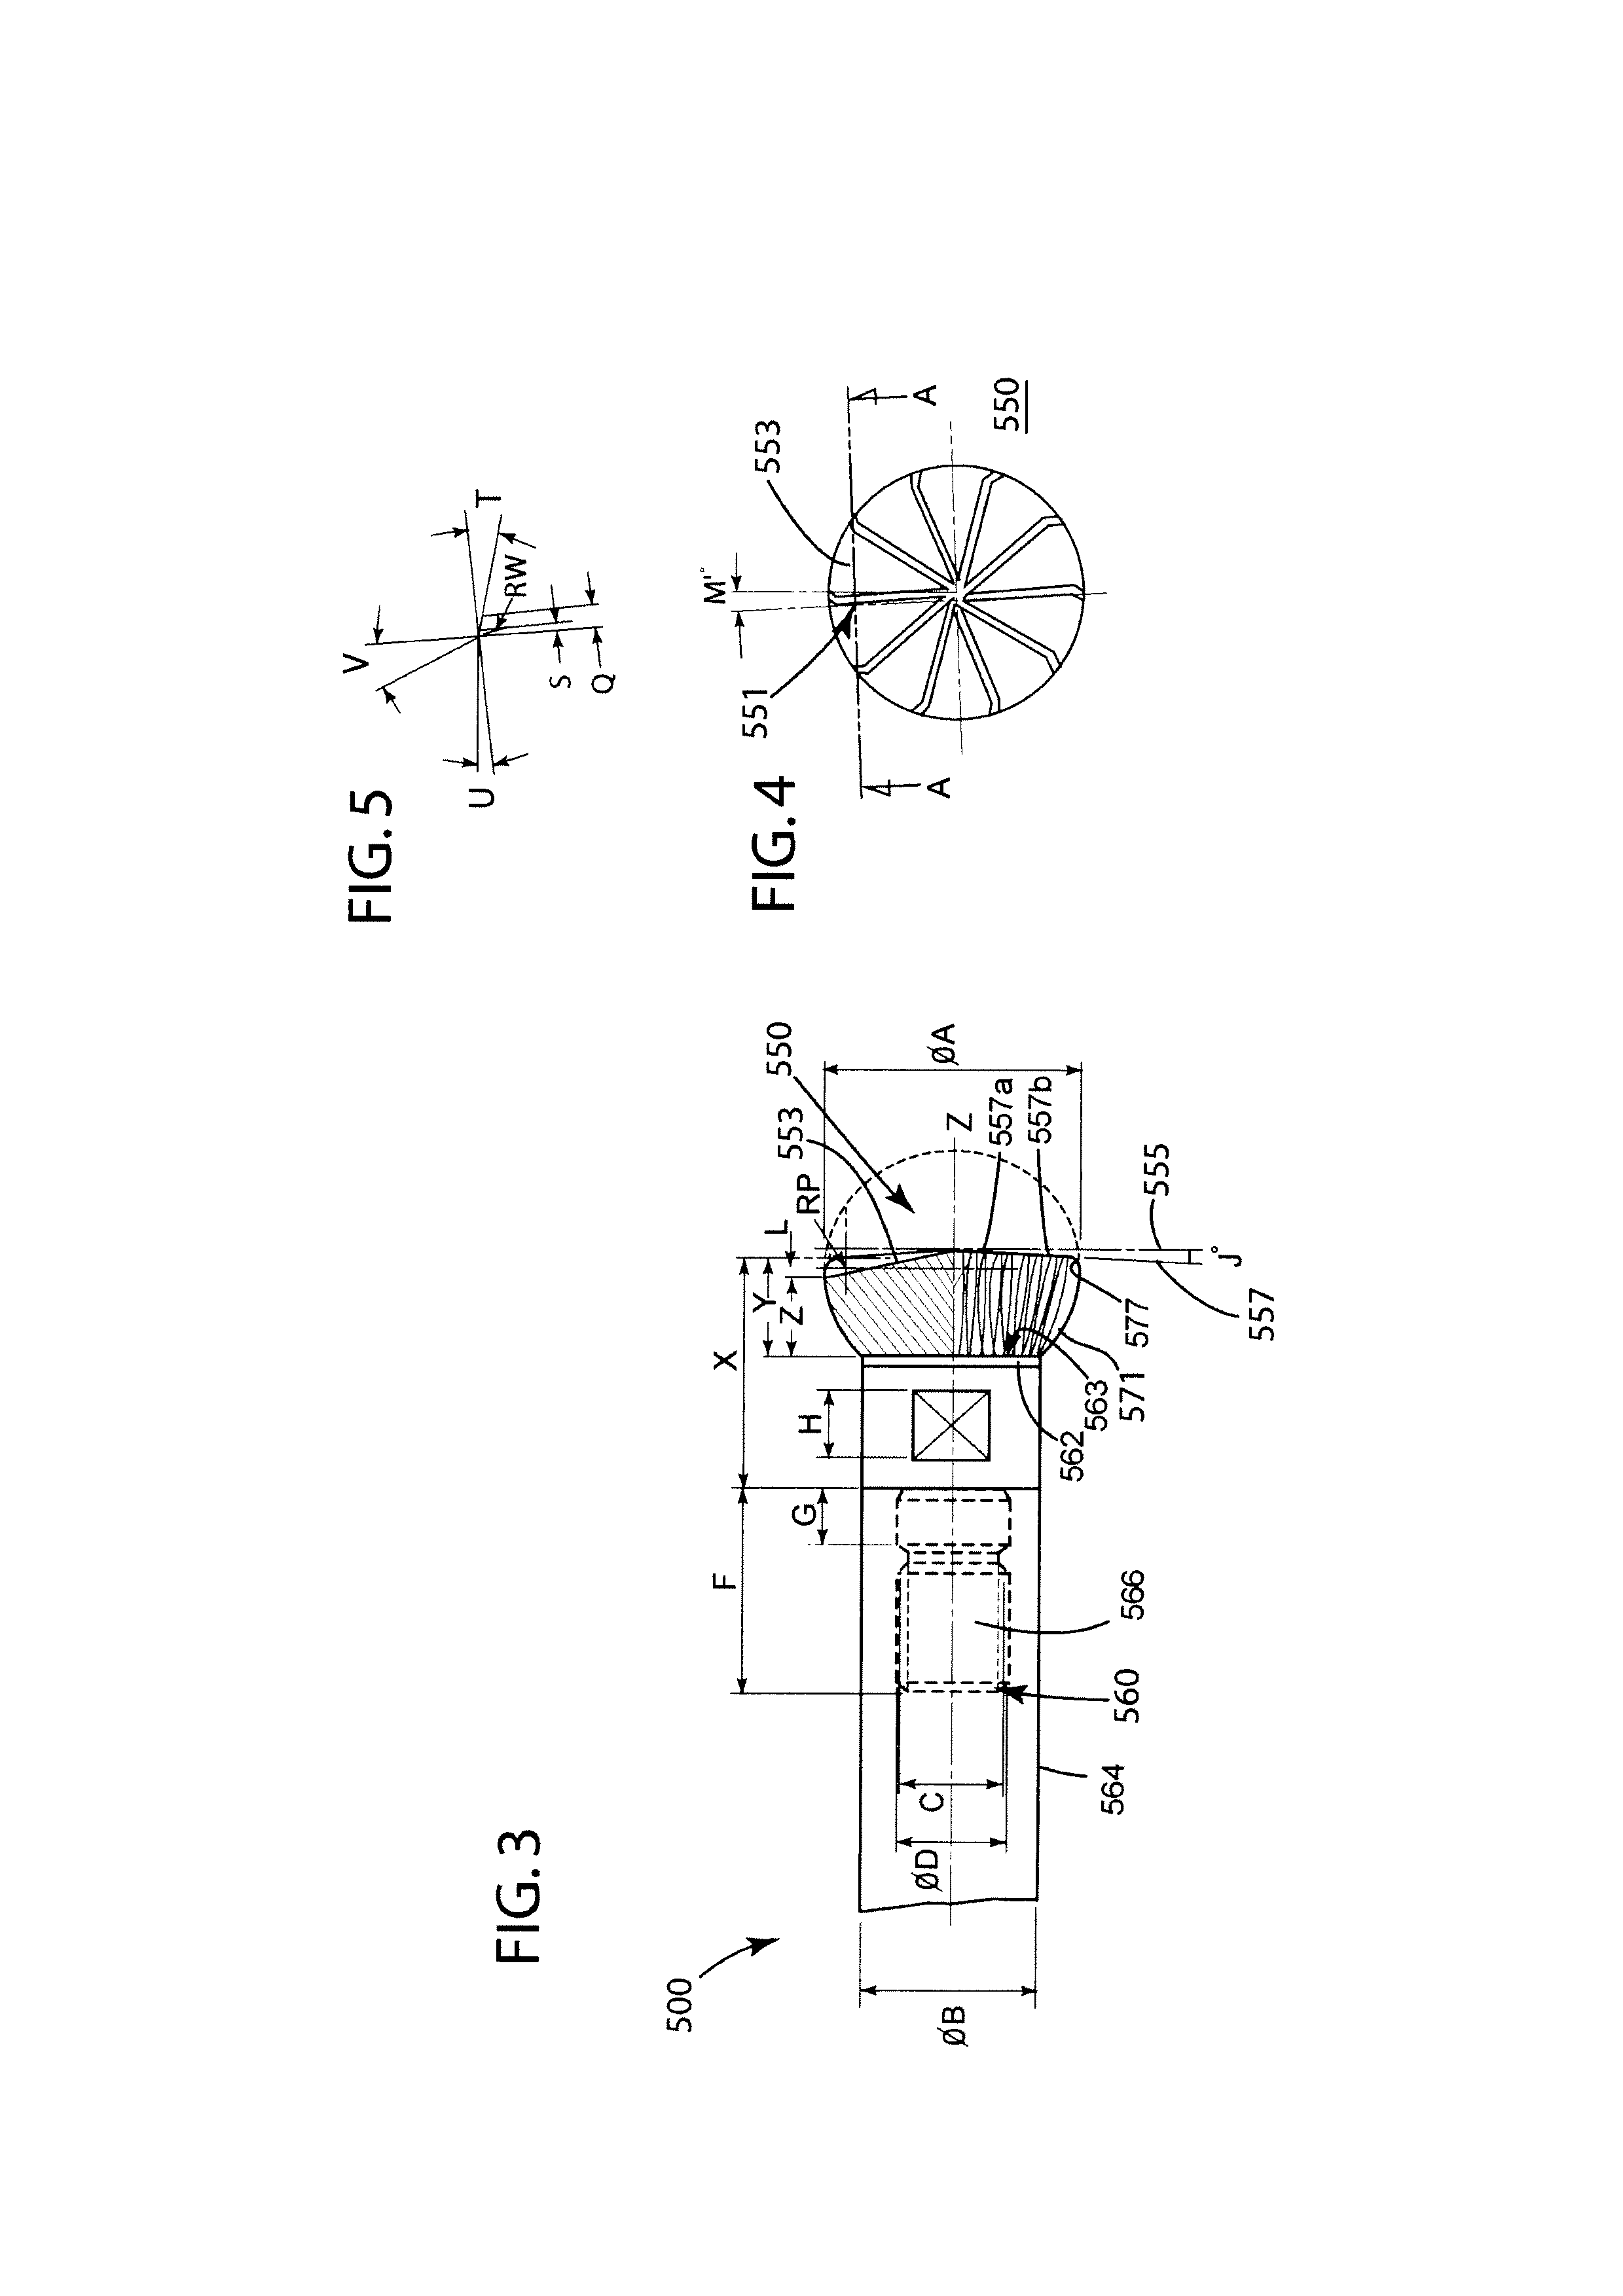 Mill and method of use